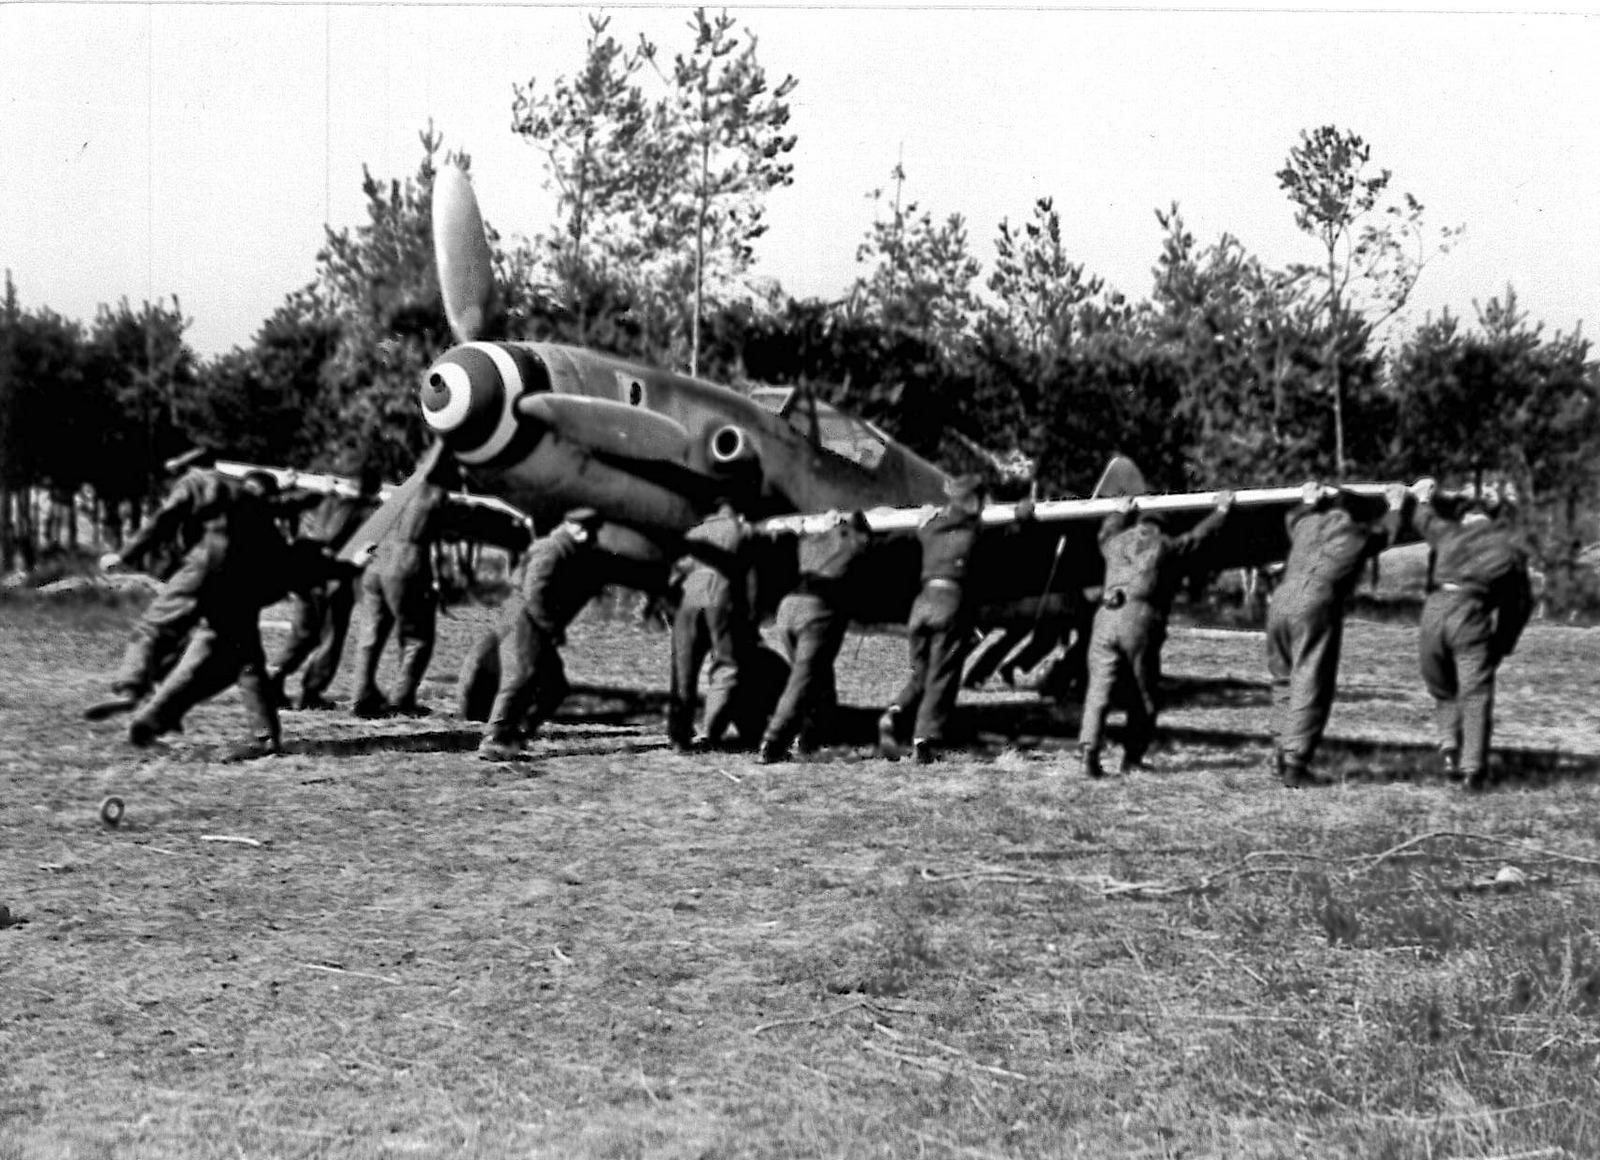 Visconti's Bf-109G being pushed in the sheltered area of Lonate Pozzolo airfield. ( Luigino Caliaro Archive)